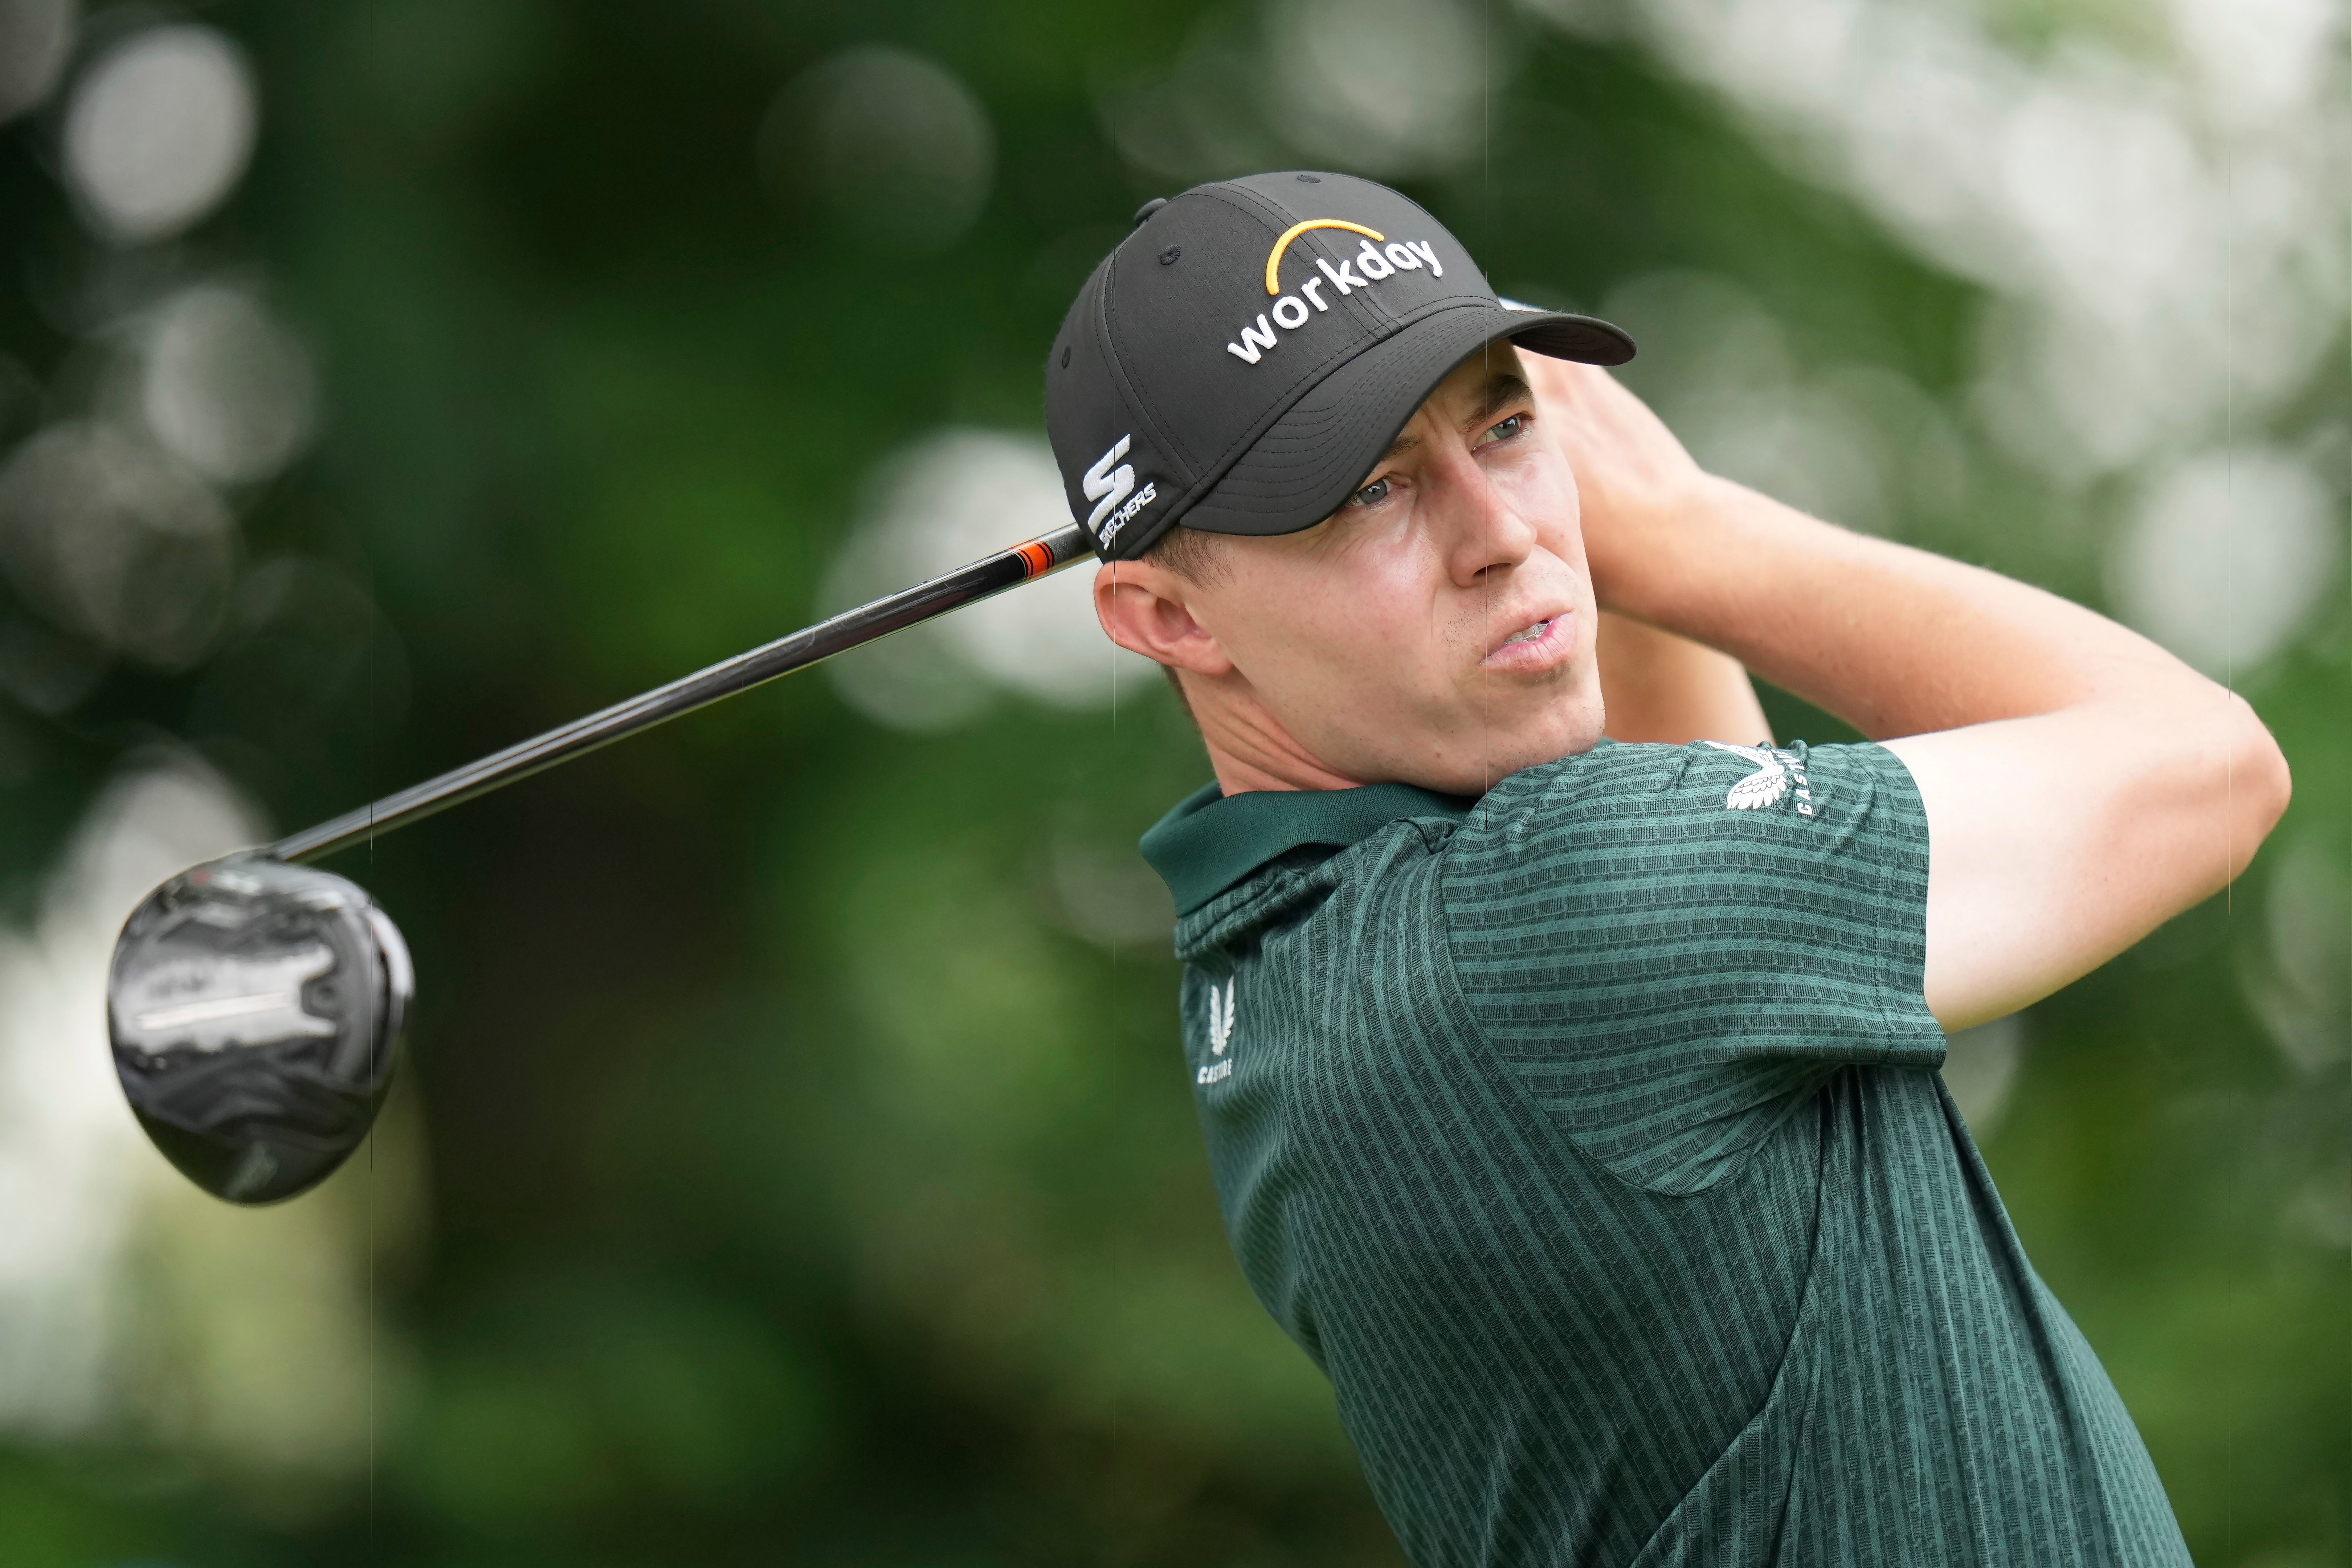 Matt Fitzpatrick carded an opening 68 in the US Open at Brookline (Nathan Denette/The Canadian Press/AP)